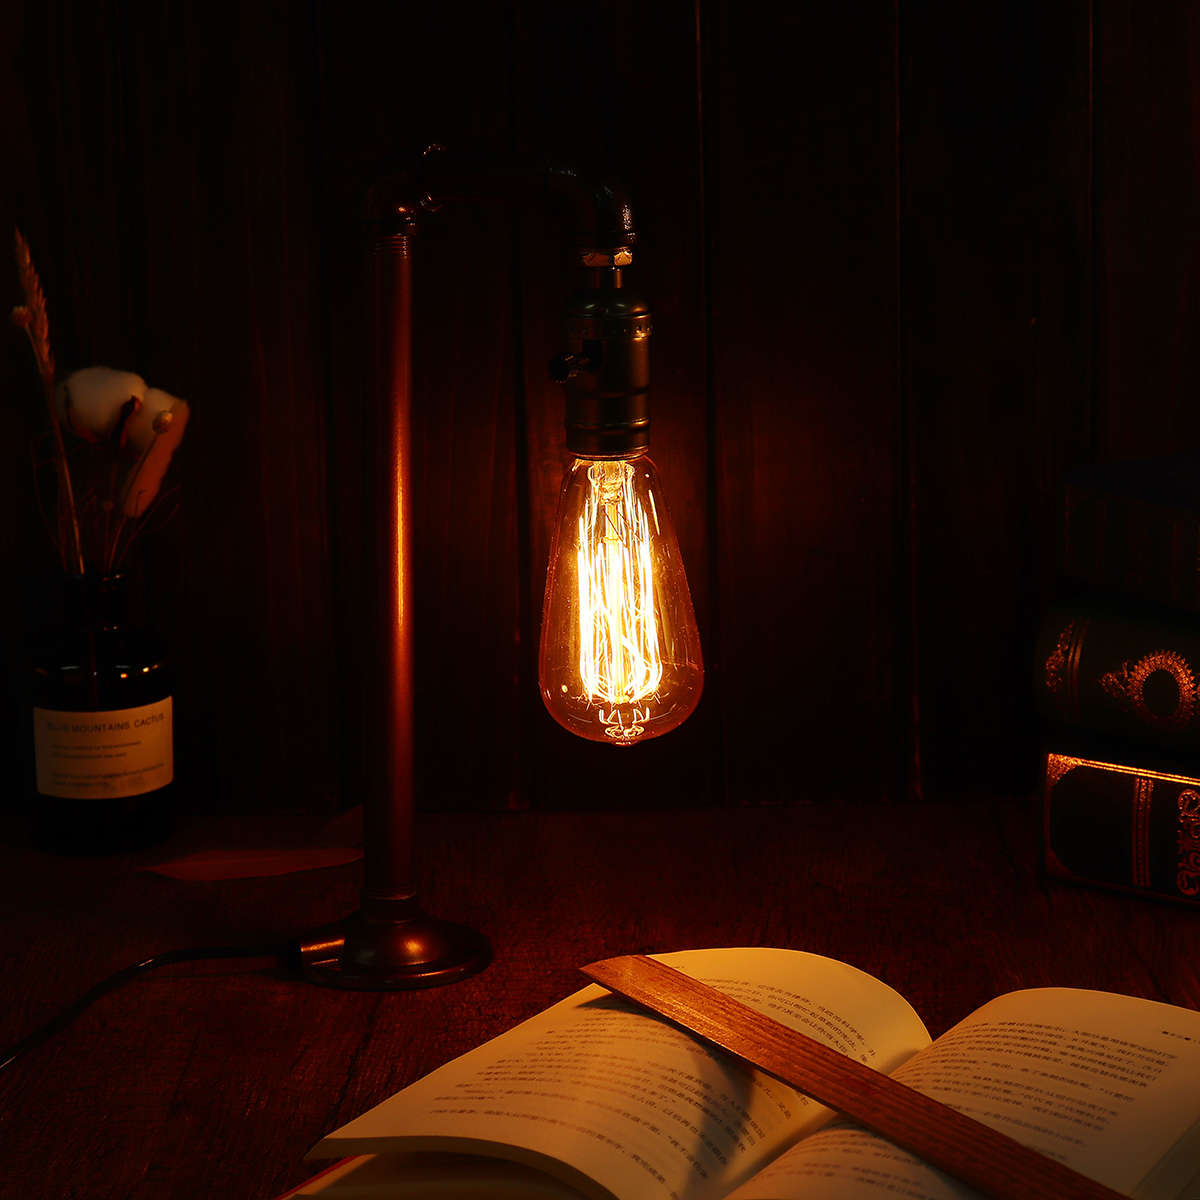 Industrial-Water-Pipe-E27-Bulb-Lamp-Light-Desk-Table-Lamp-Home-Bedroom-Fixture-Decor-1432211-2